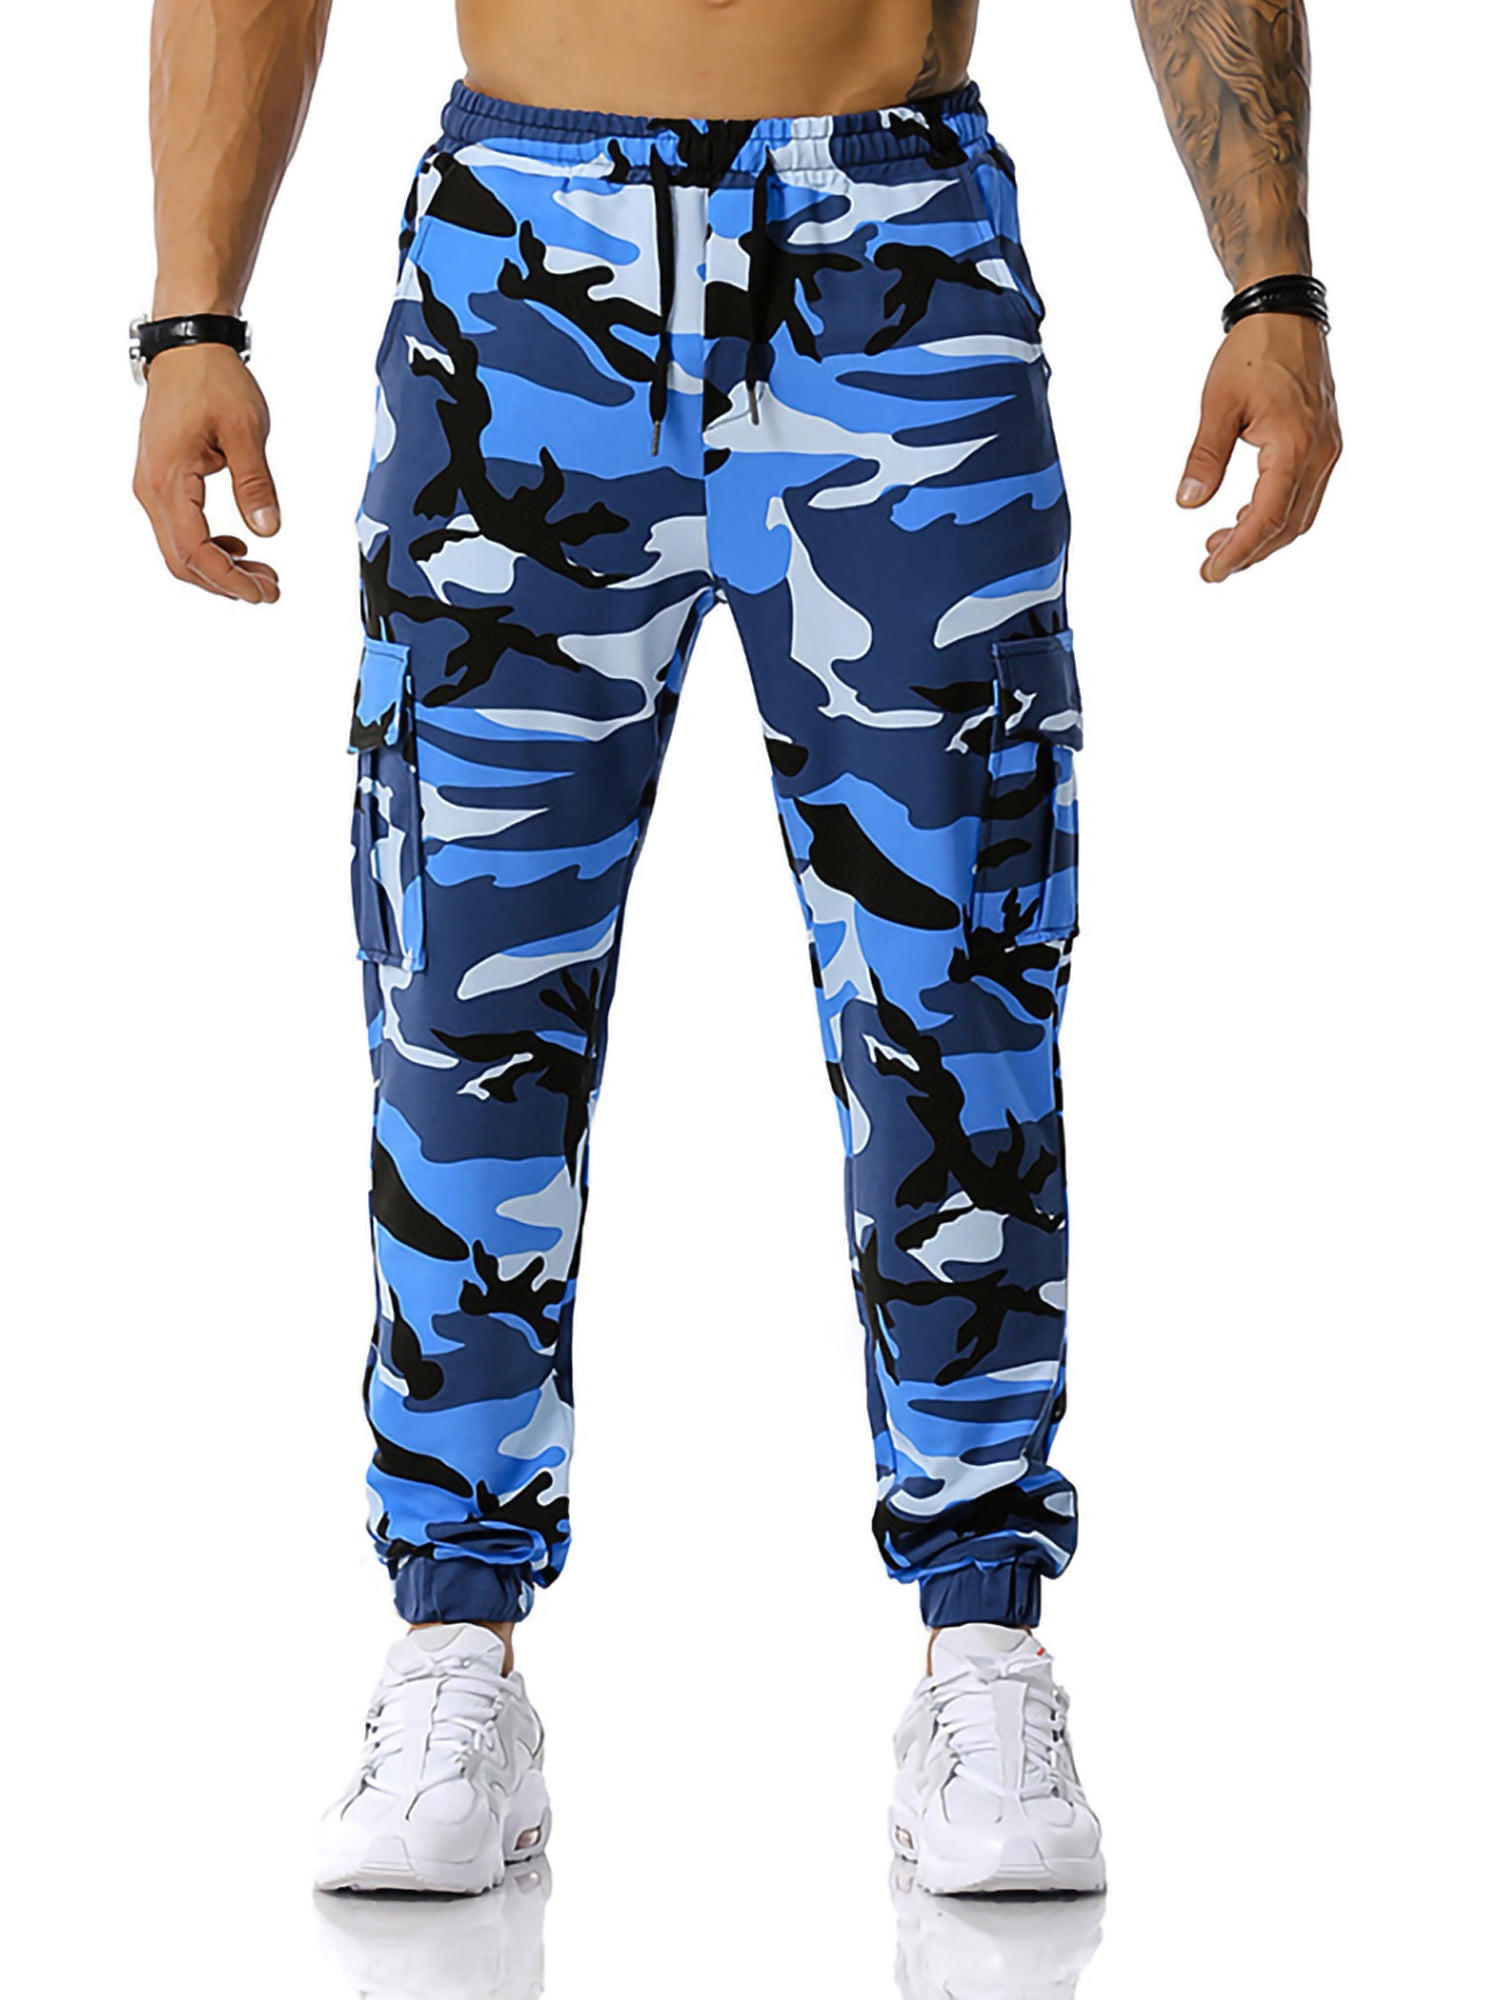 Mens Slim Fit Jogger Pants Camouflage Workout Sweatpants Casual Waist Drawstring Cargo Trouser Winter 3XL Running Pants